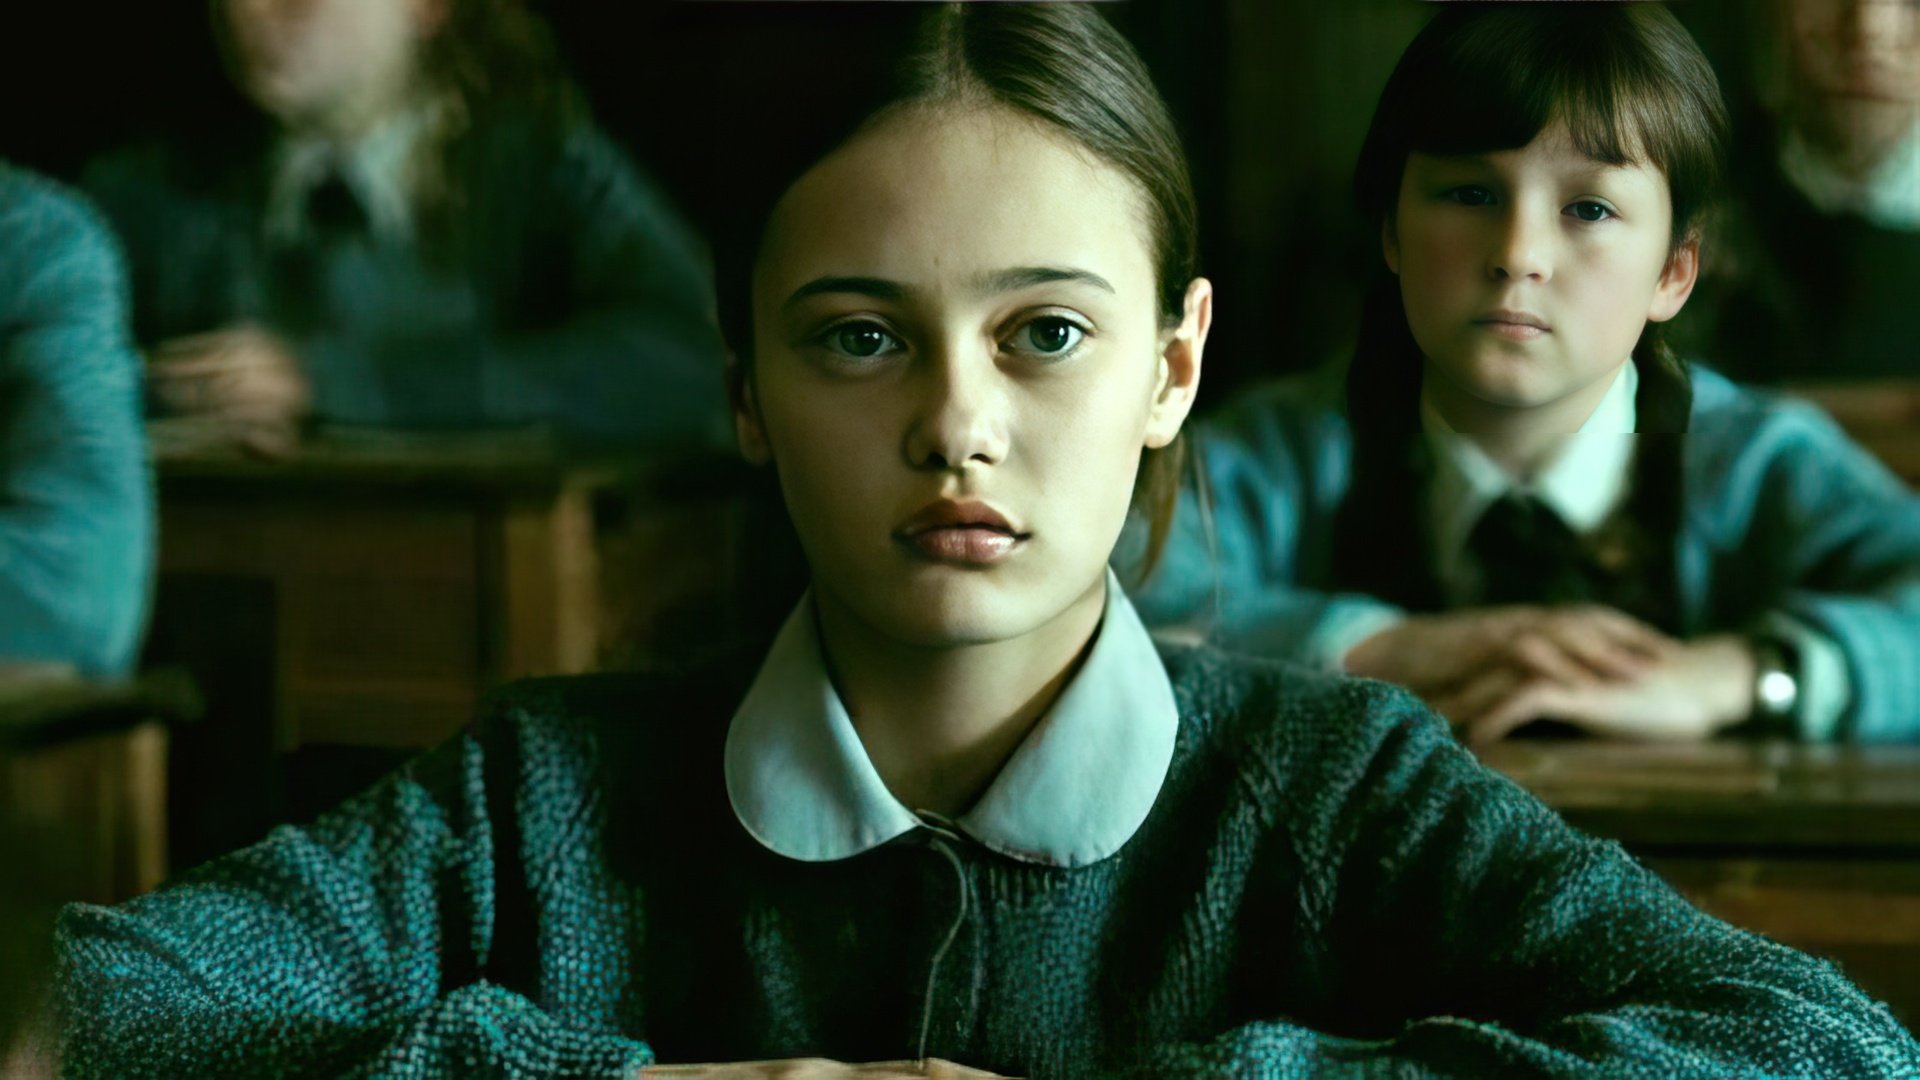 «Never Let Me Go» (2010) was the first film role by Ella Purnell